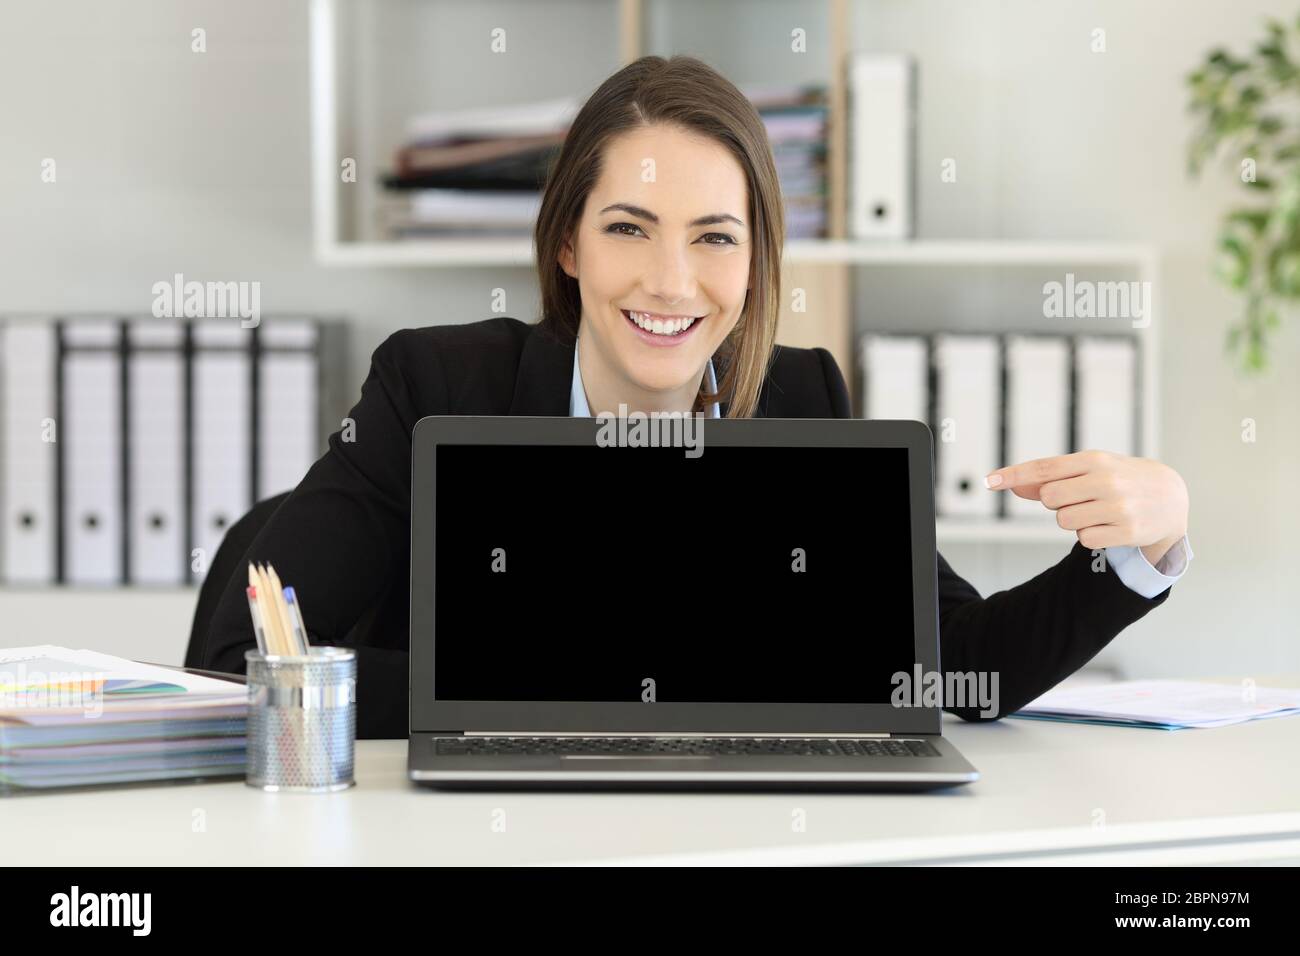 Front view portrait of a happy office worker pointing at a laptop screen mockup Stock Photo